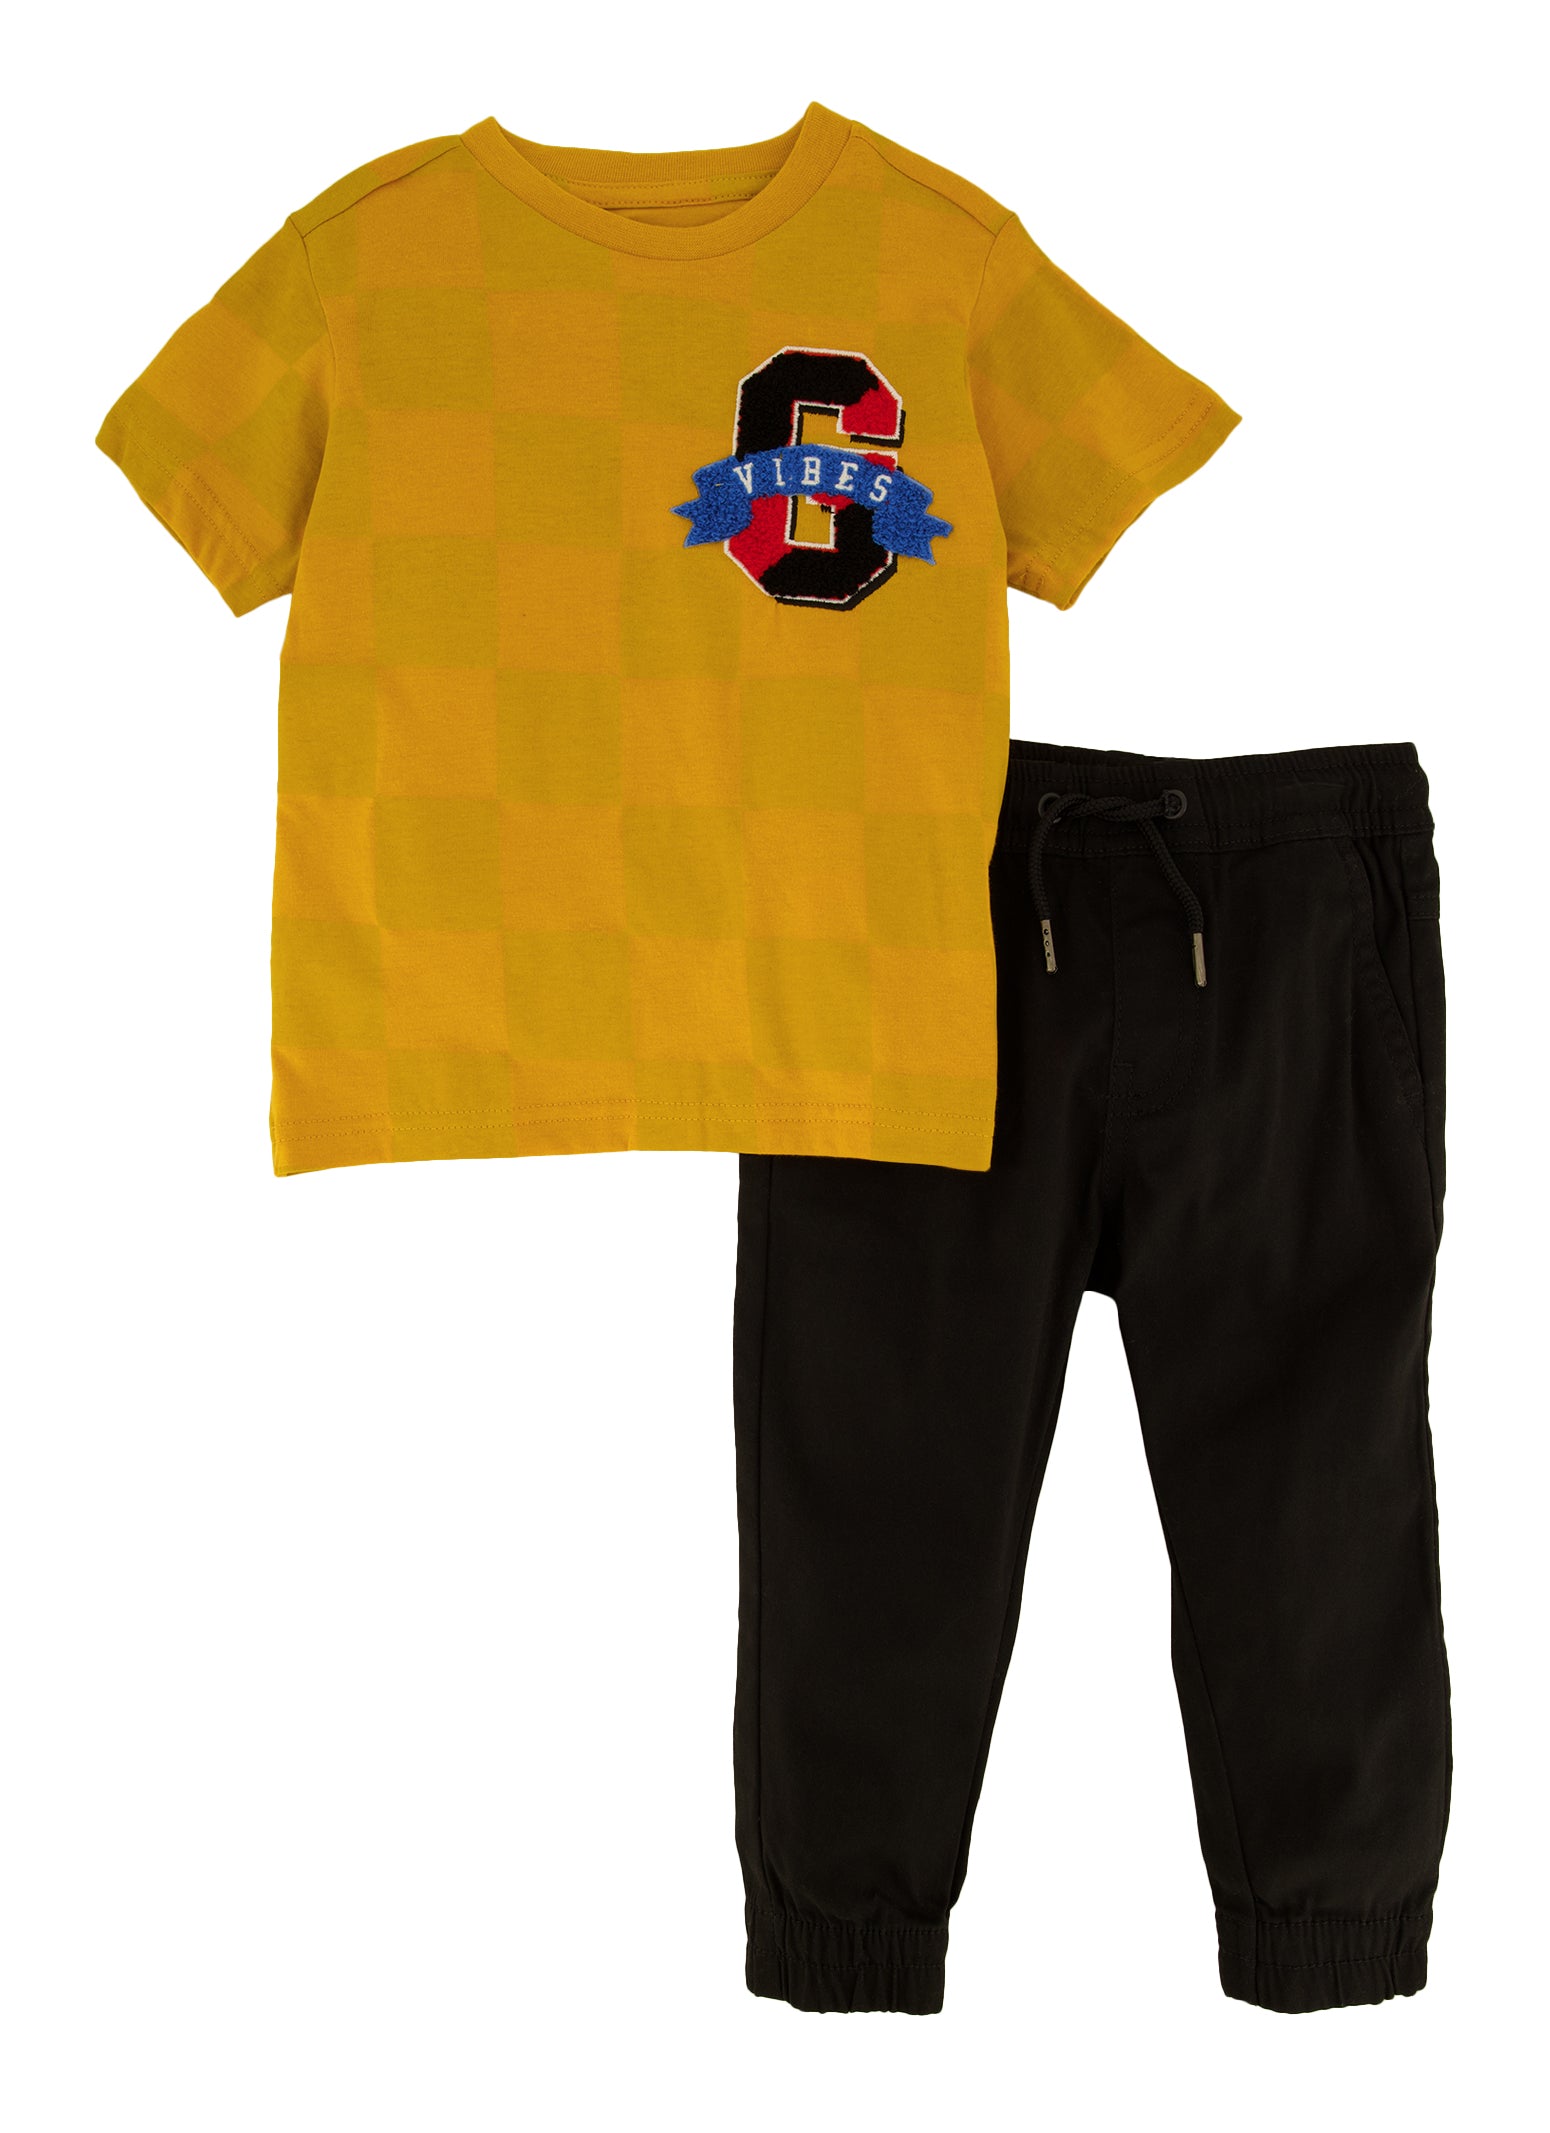 Toddler Boys Checkered G Vibes Chenille Patch Tee and Joggers, Yellow, Size 4T